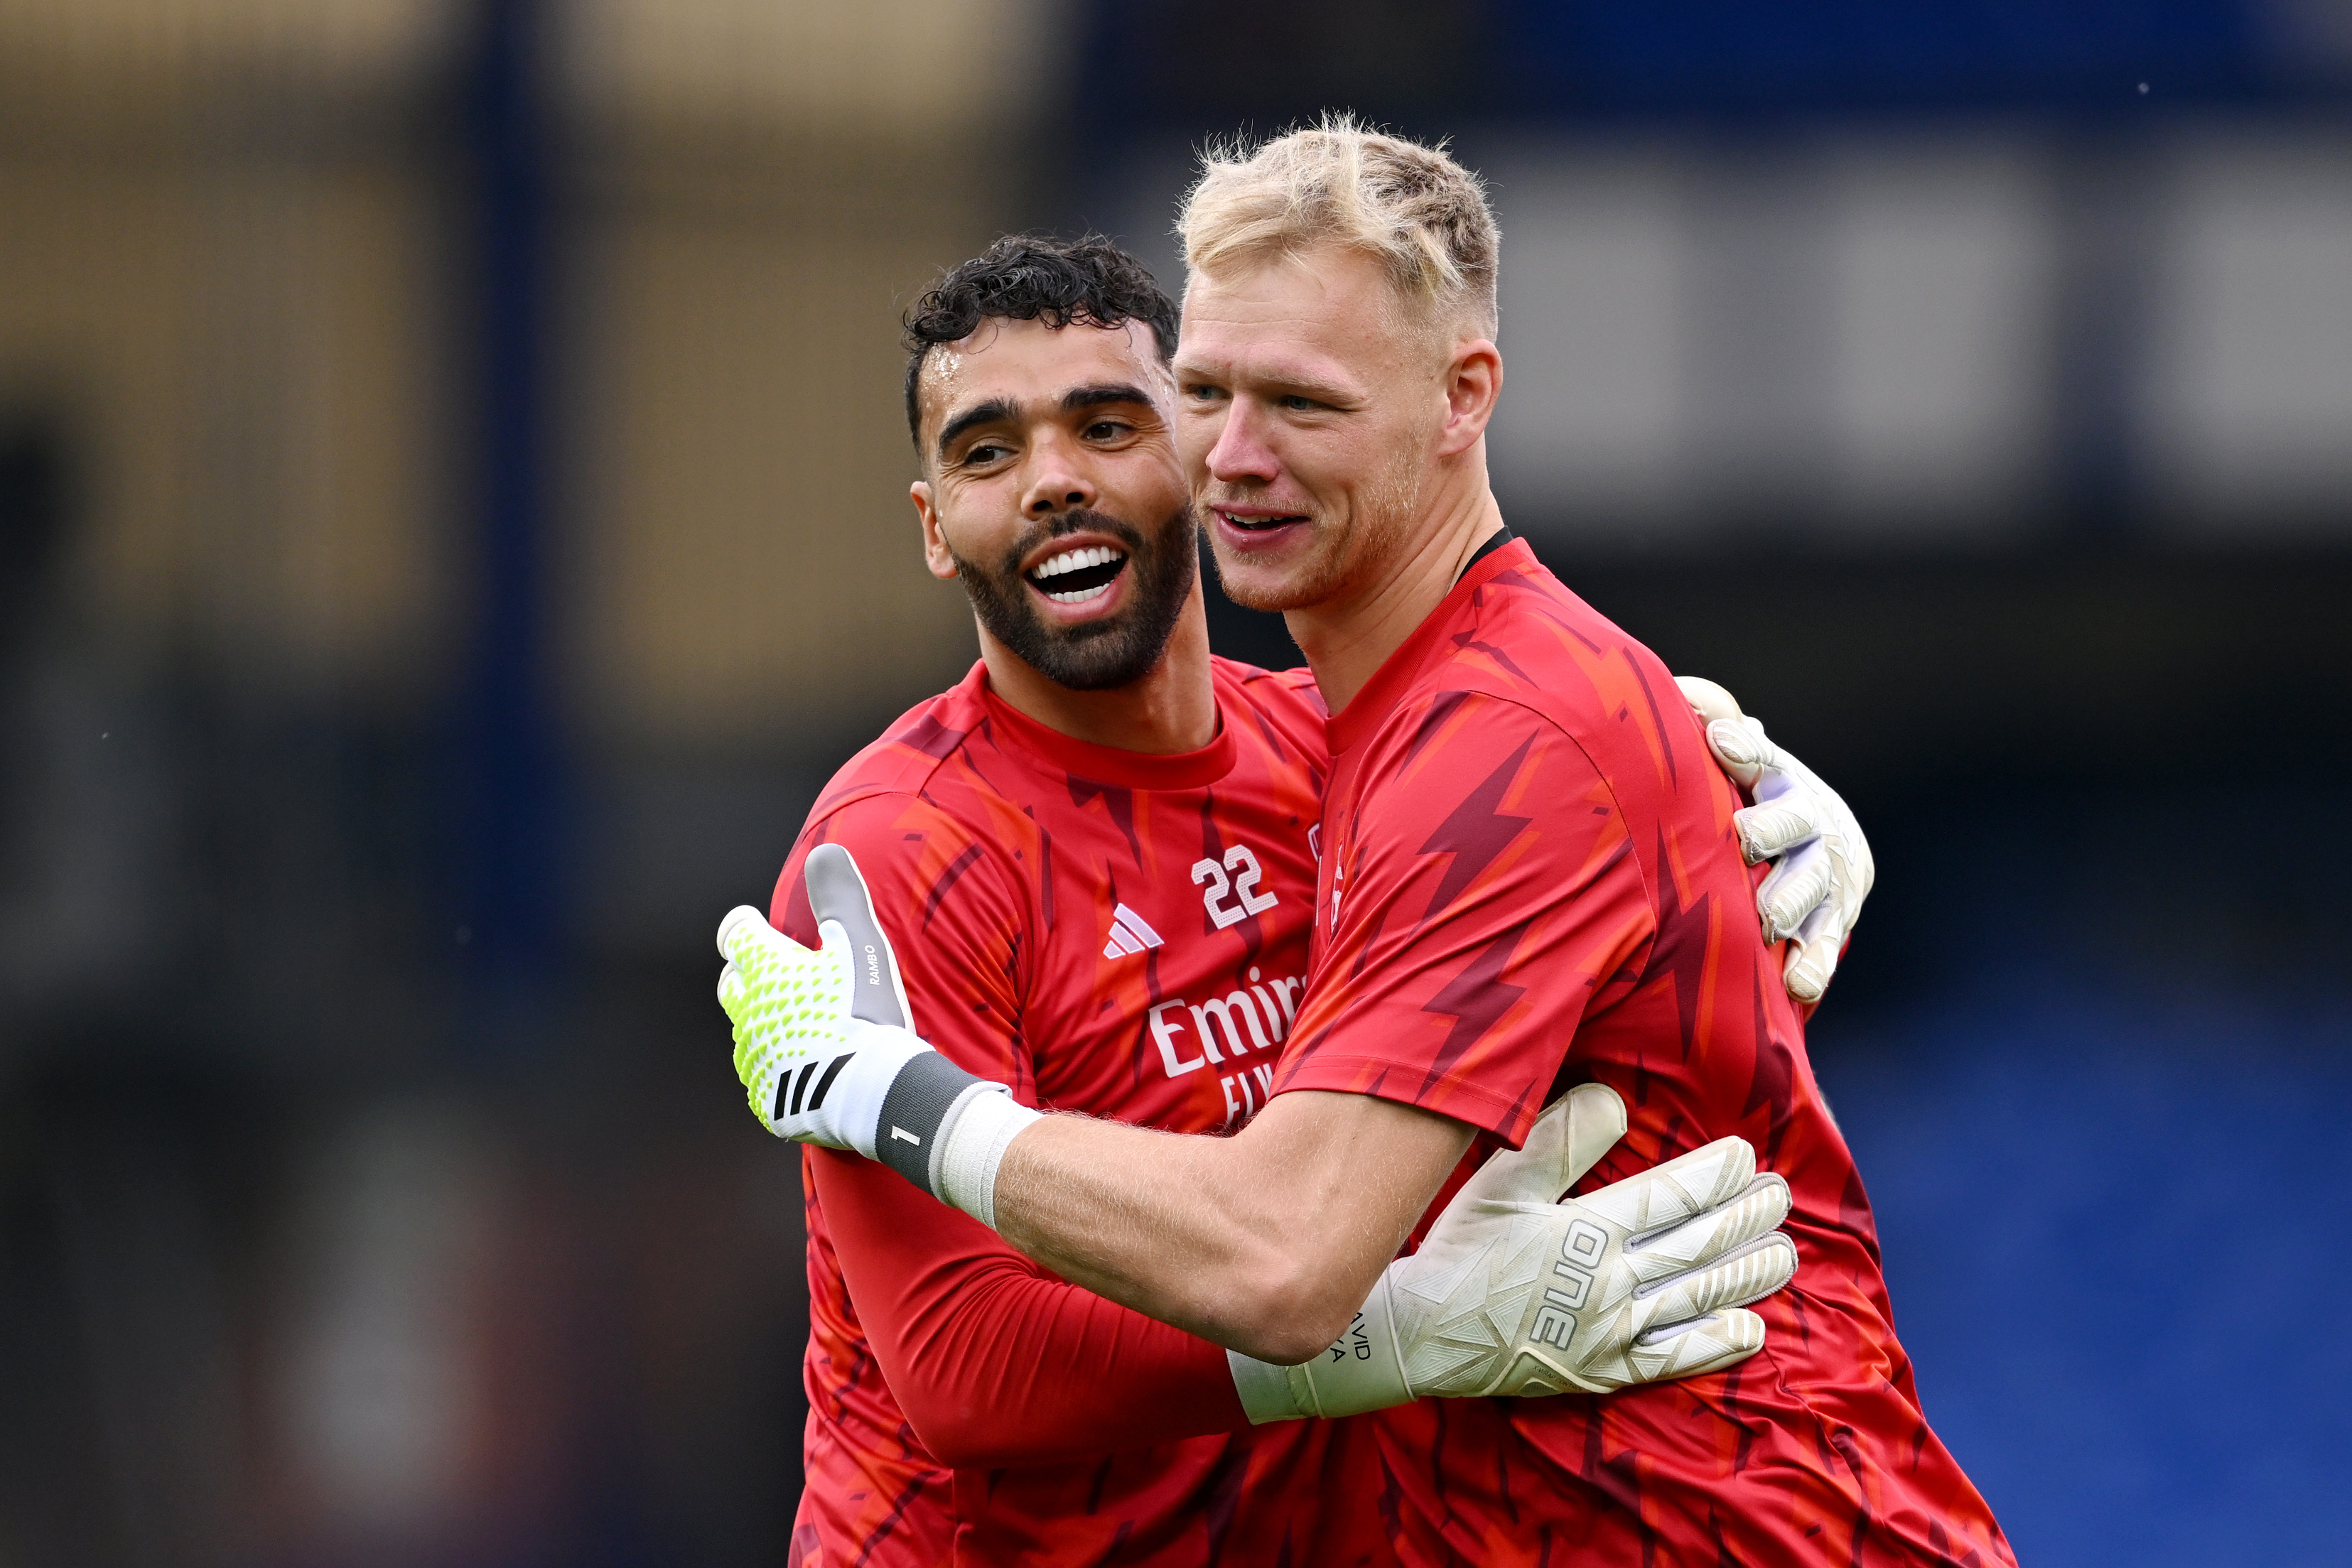 Arsenal goalkeeper Aaron Ramsdale to join Newcastle United and reunite with Eddie Howe